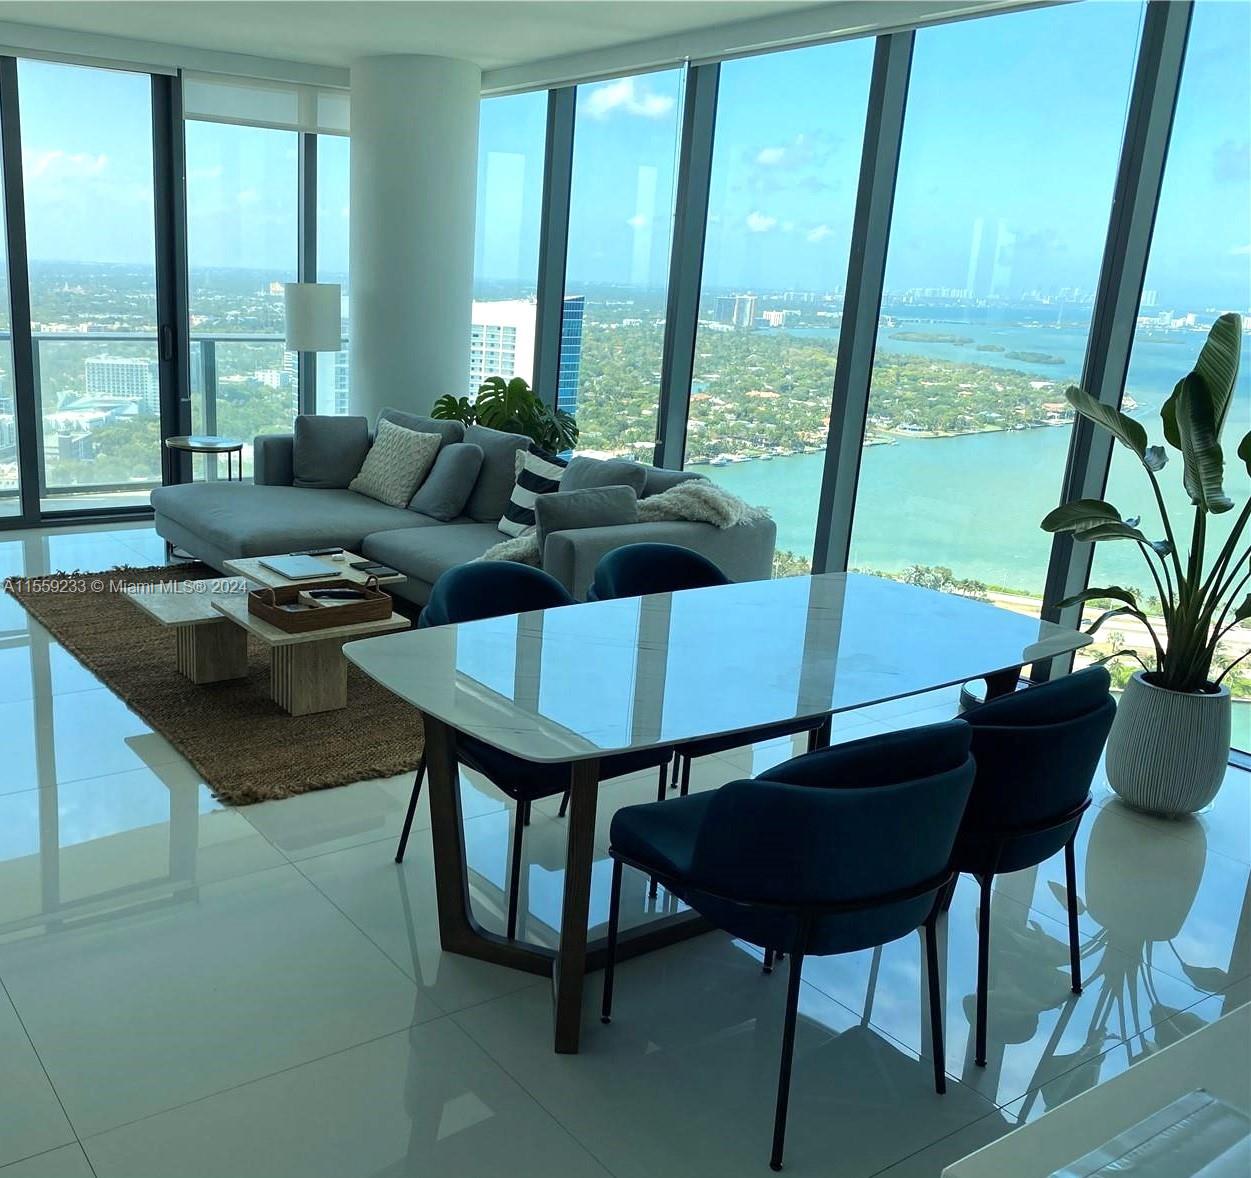 AMAZING LOCATION IN THE HEART OF MIAMI, UNIT WITH LOTS OF AMENITIES WHICH INCLUDES GYM, SAUNA, JACUZZI, POOL, BBQ, VALET PARKING AND OUTDOOR GRILLS. LOCATED 10 MINS FROM MIAMI BEACH AND BRICKELL. THIS LYFESTYLE CONDO HAS THE BEST RESTAURANTS IN THE AREA WITH WALKING DISTANCE TO MIDTOWN. EASY TO SHOW. Equal Housing Opportunity.